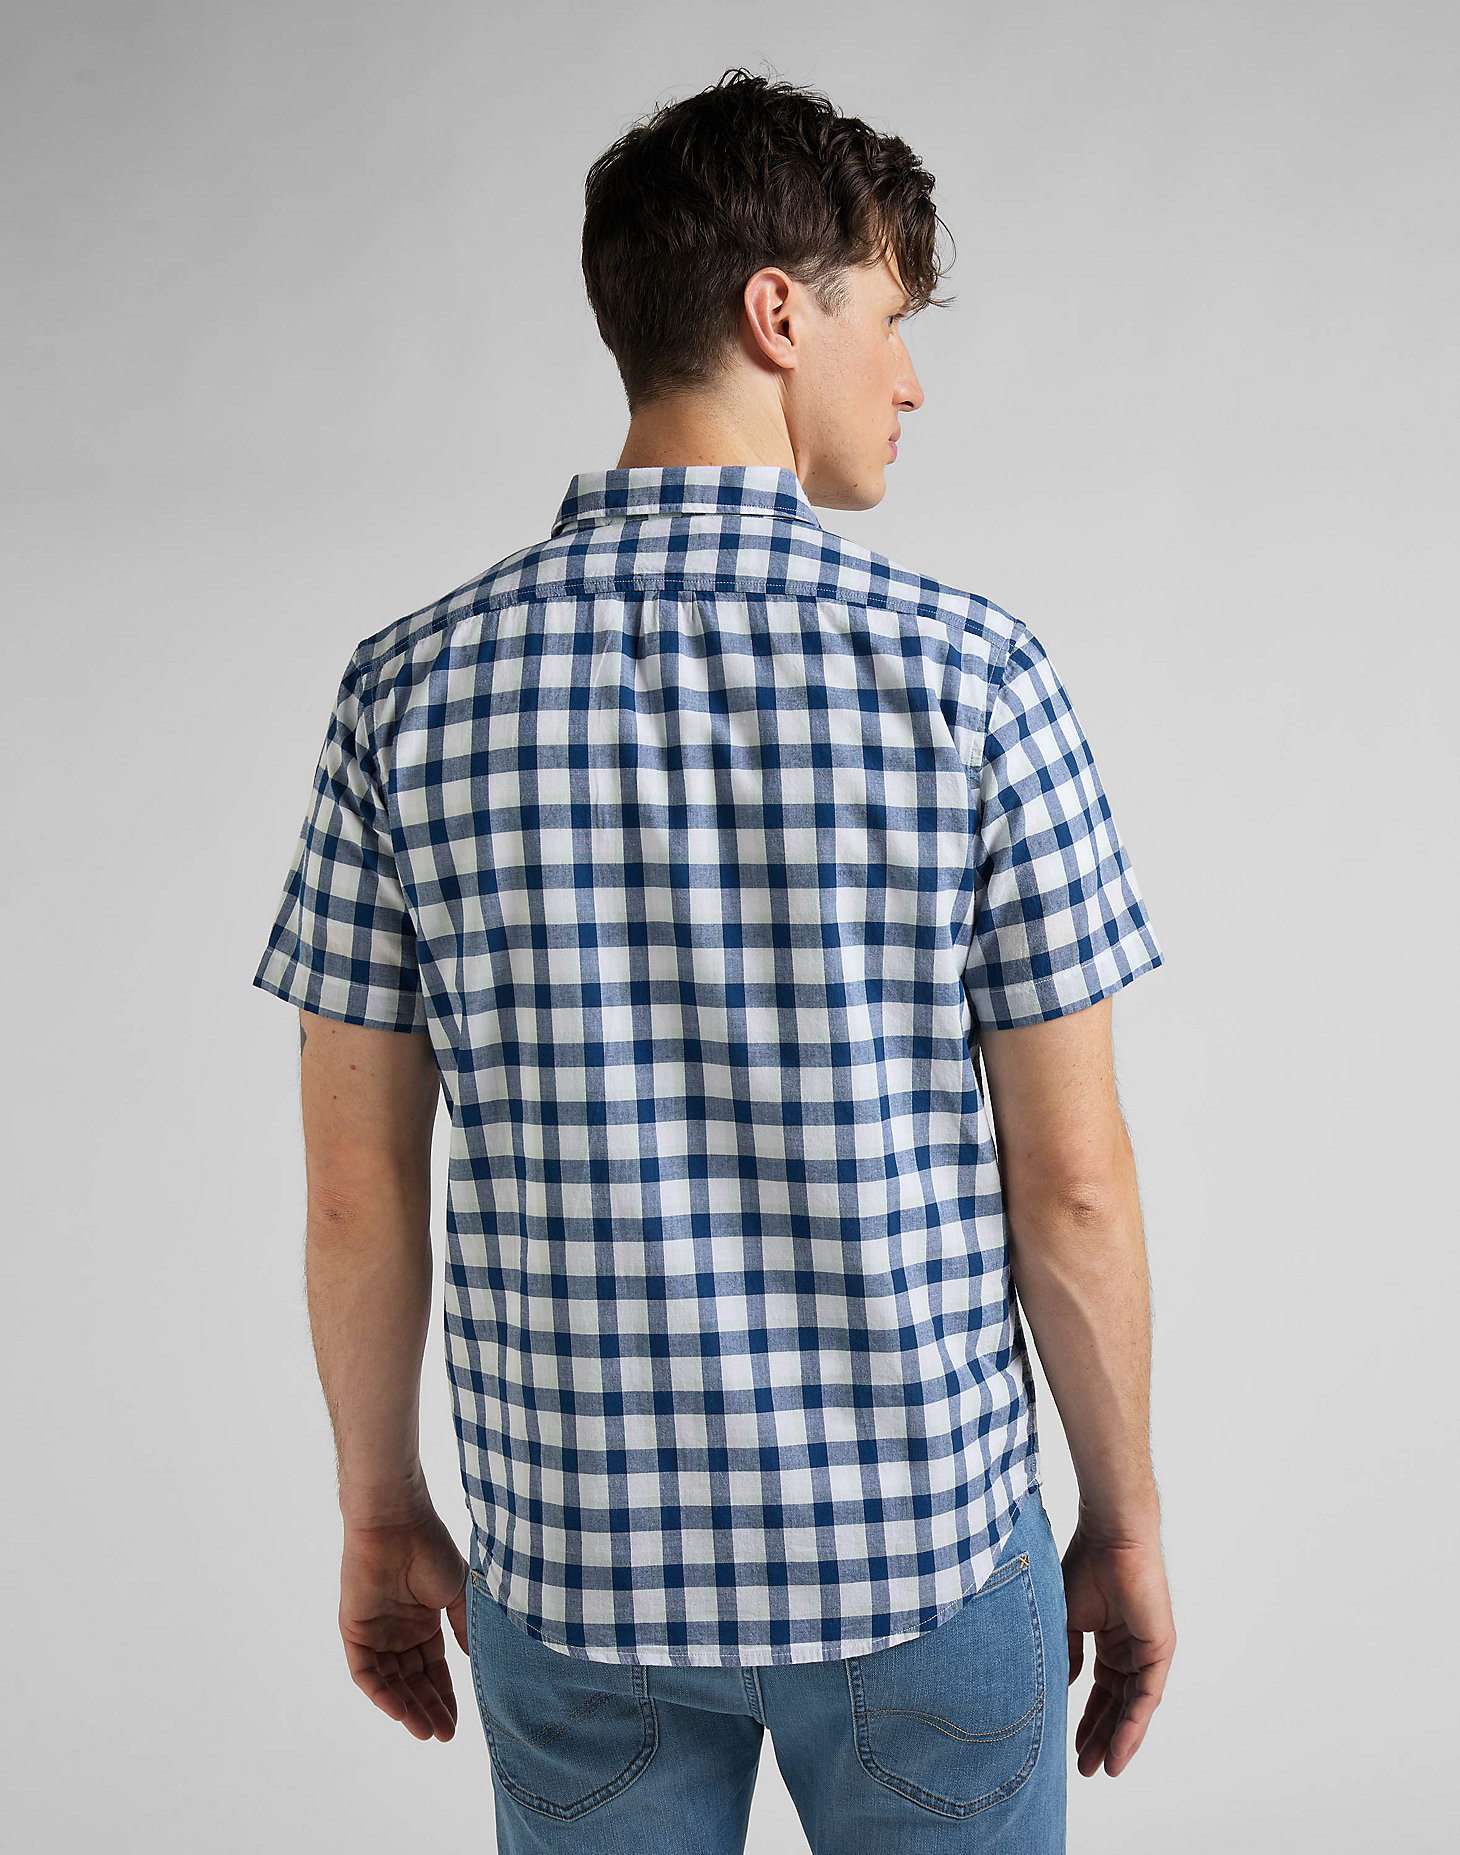 Short Sleeve Button Down Shirt in Washed Blue alternative view 1